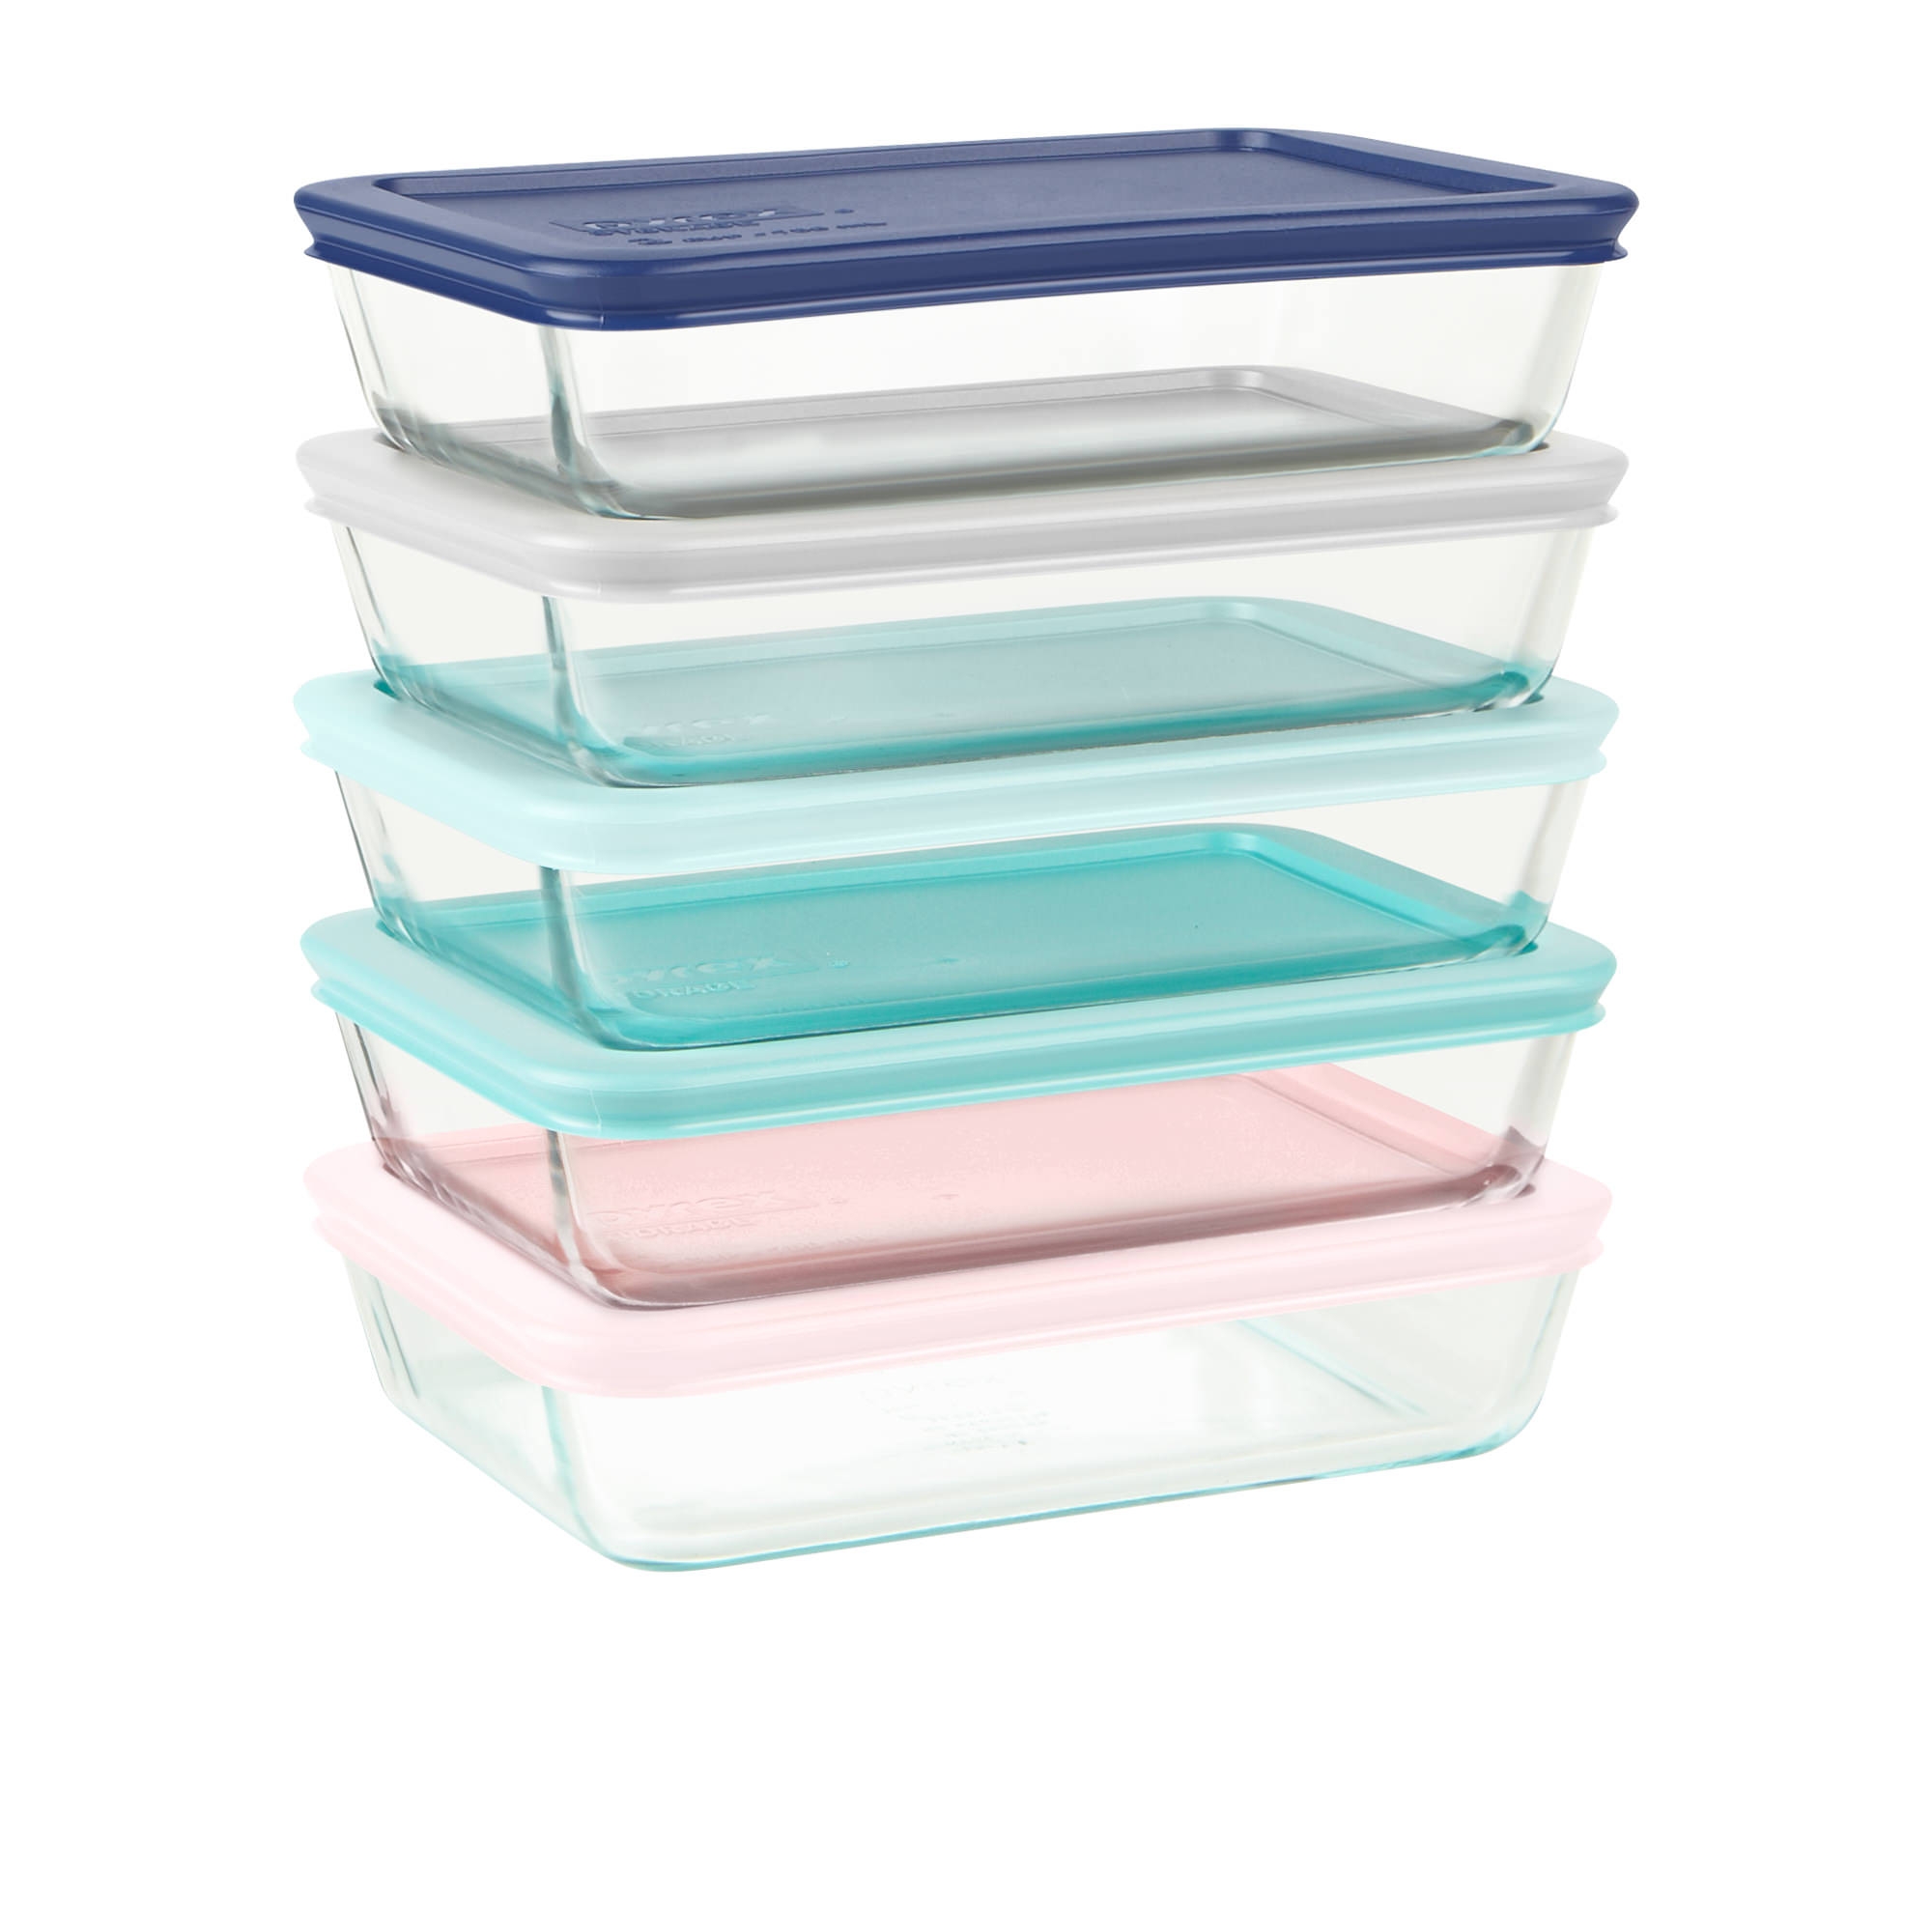 Pyrex Simply Store Rectangular Glass Meal Plan Container 750ml Set of 5 Image 1